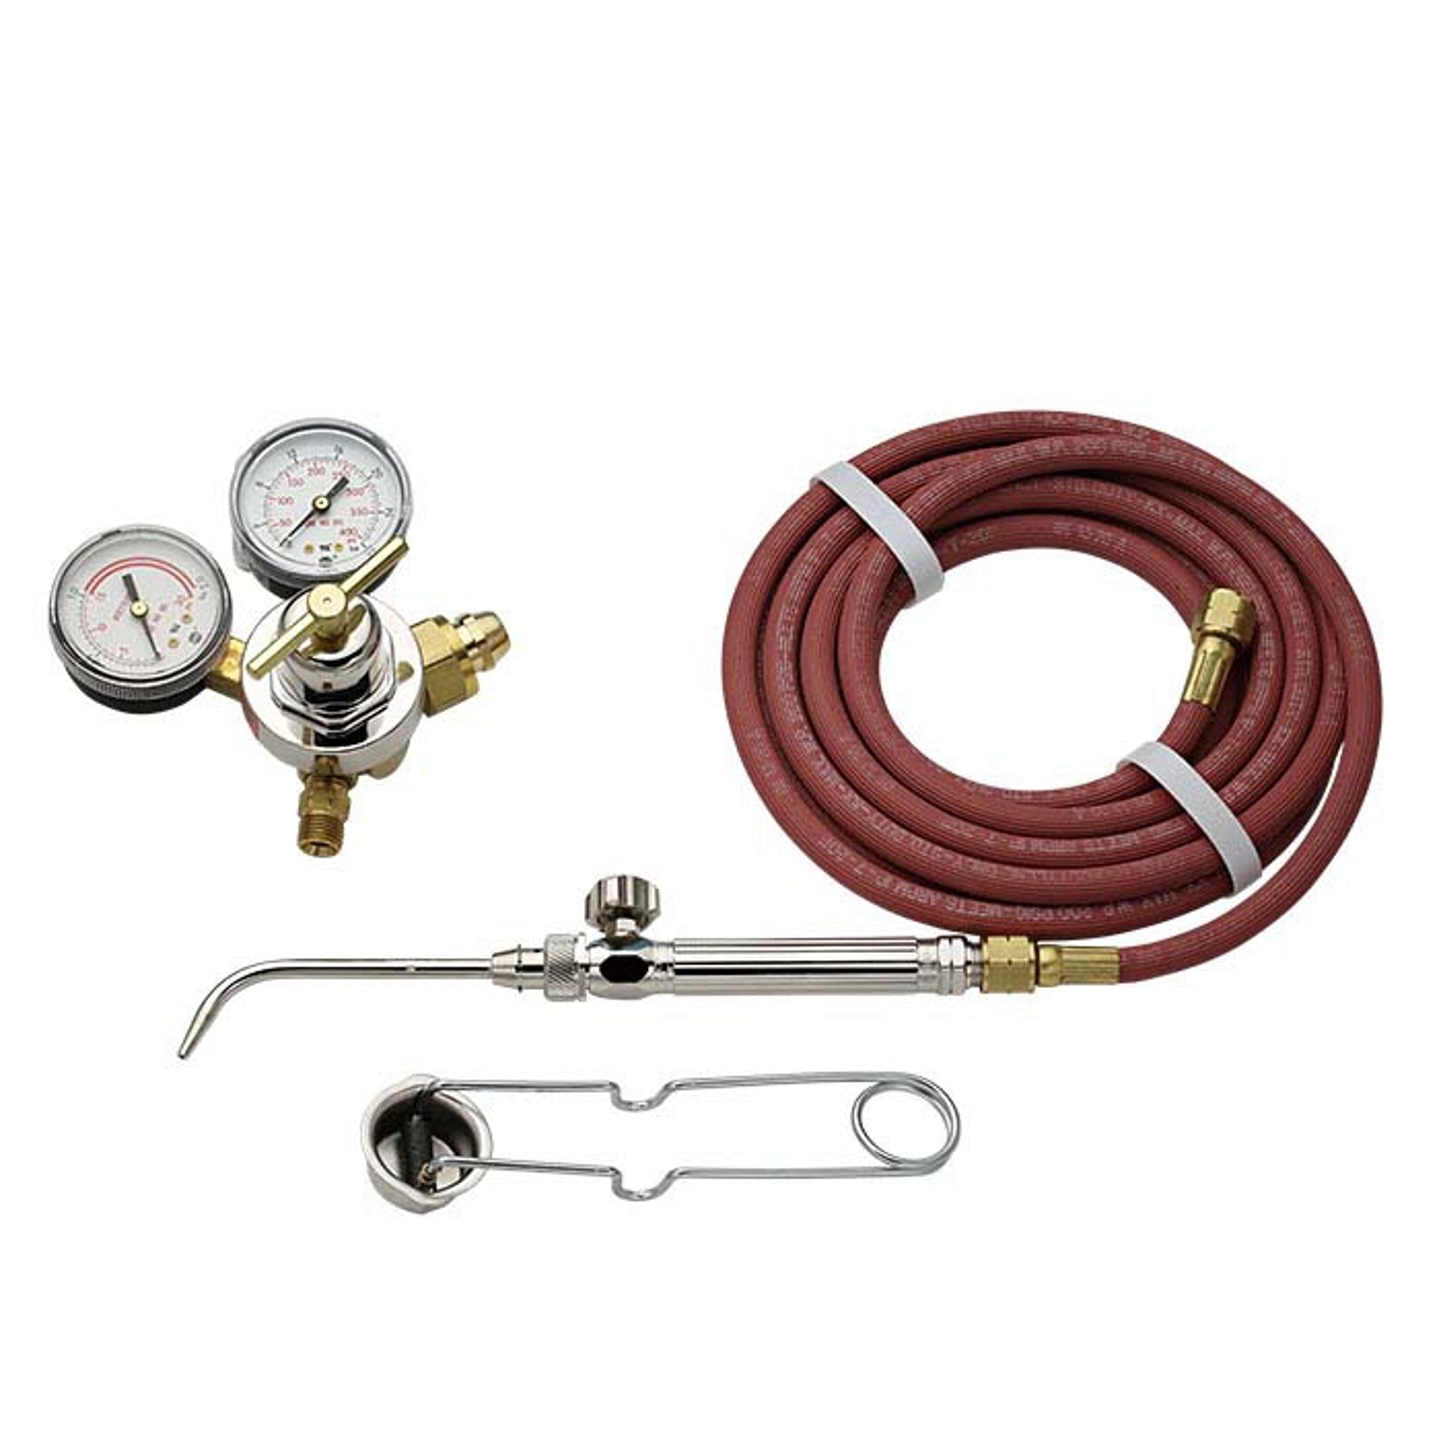 Acetylene kit without tank